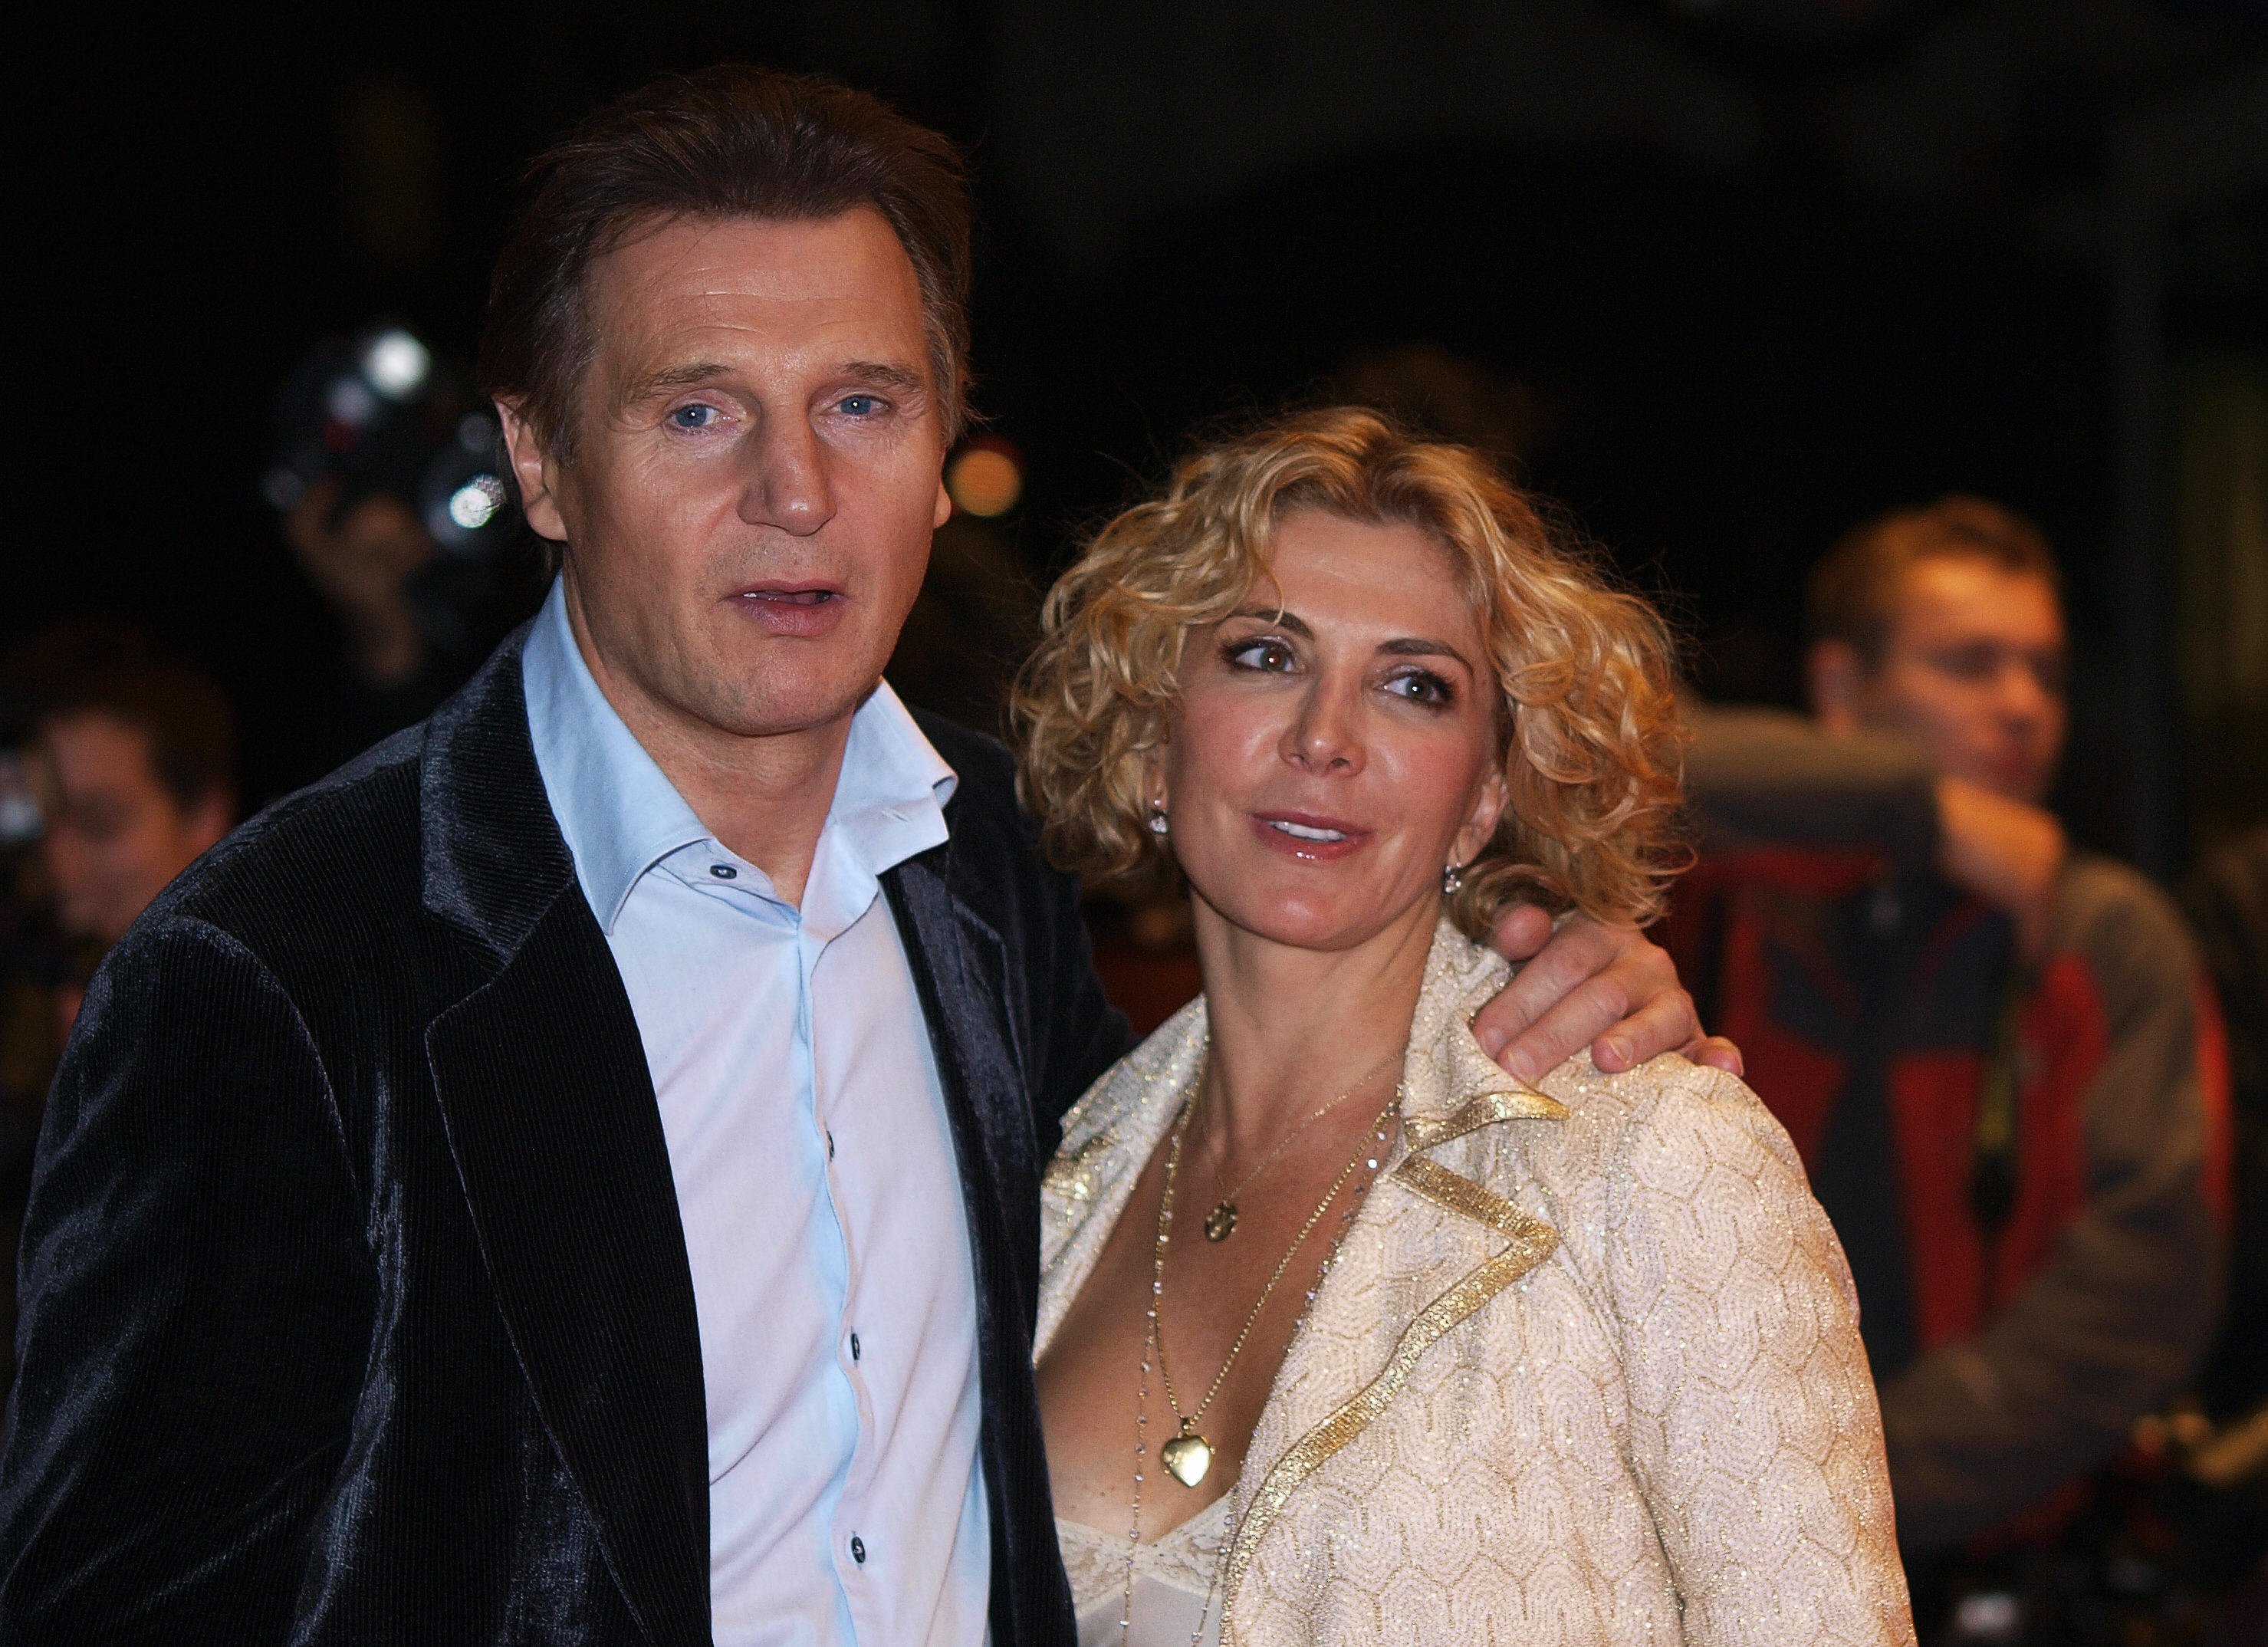 Liam Neeson and Natasha Richardson in London in 2008 | Source: Getty Images